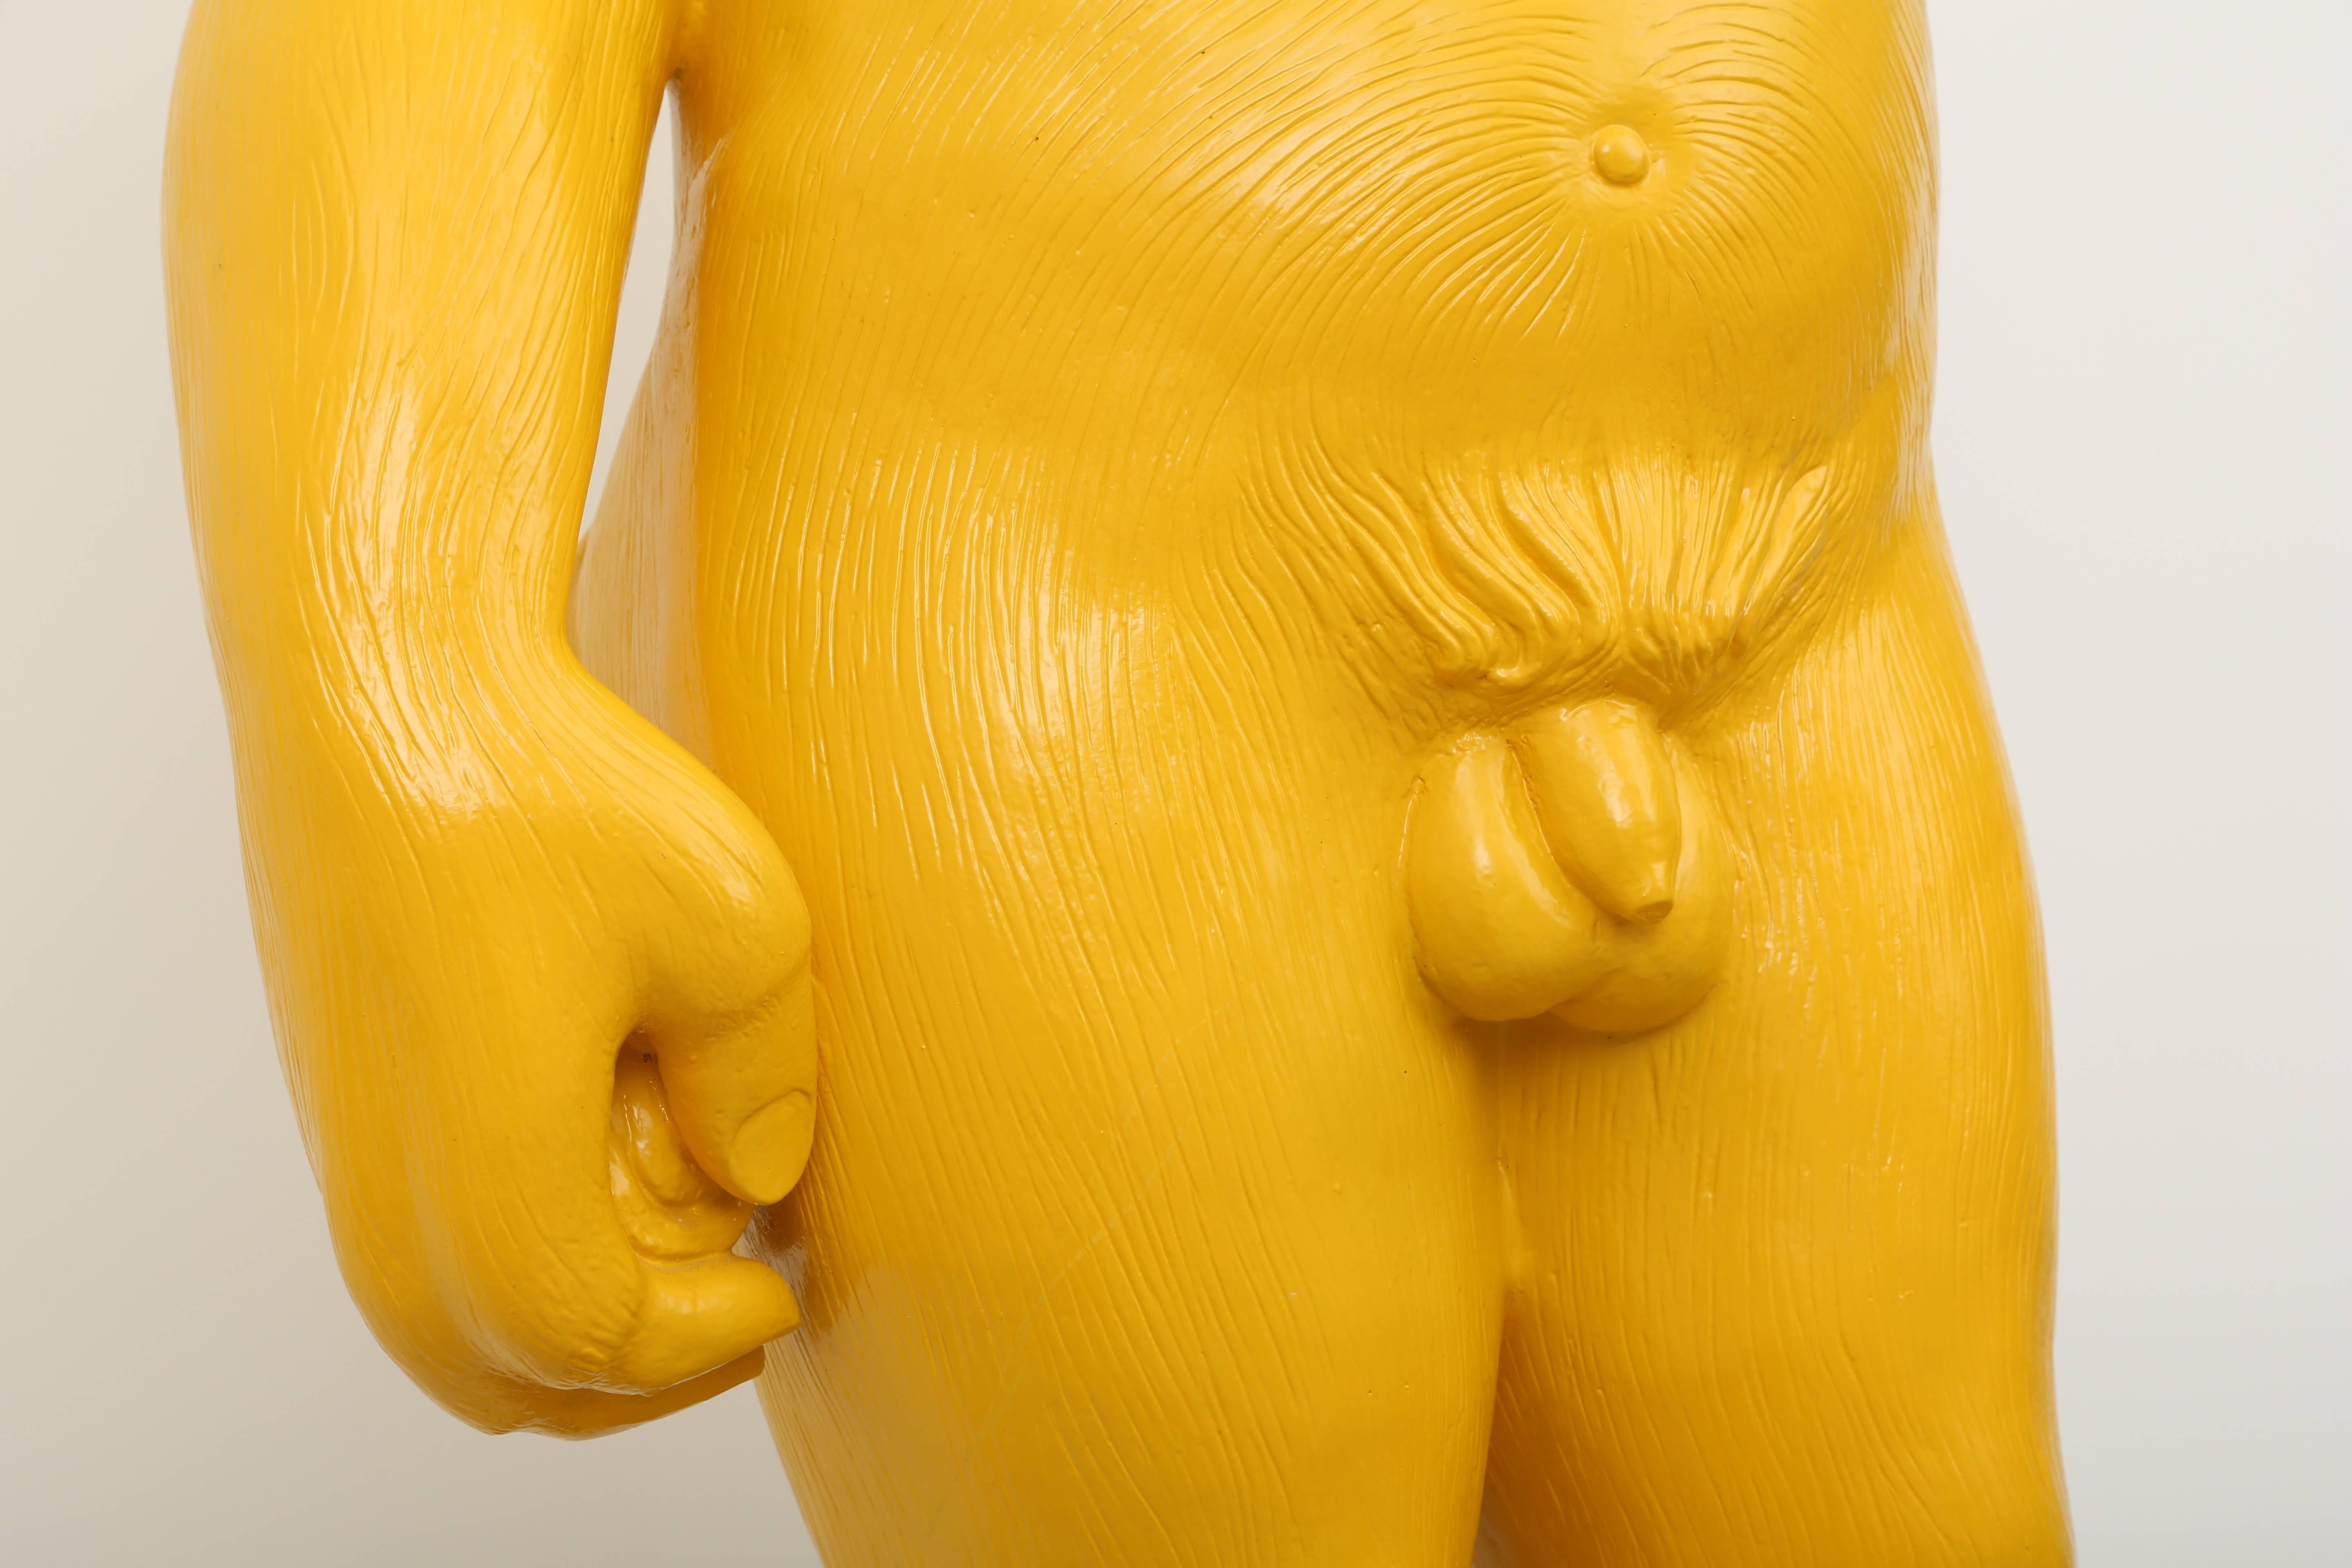 Soon ! Yellow Gorilla Sculpture in the posture of the 